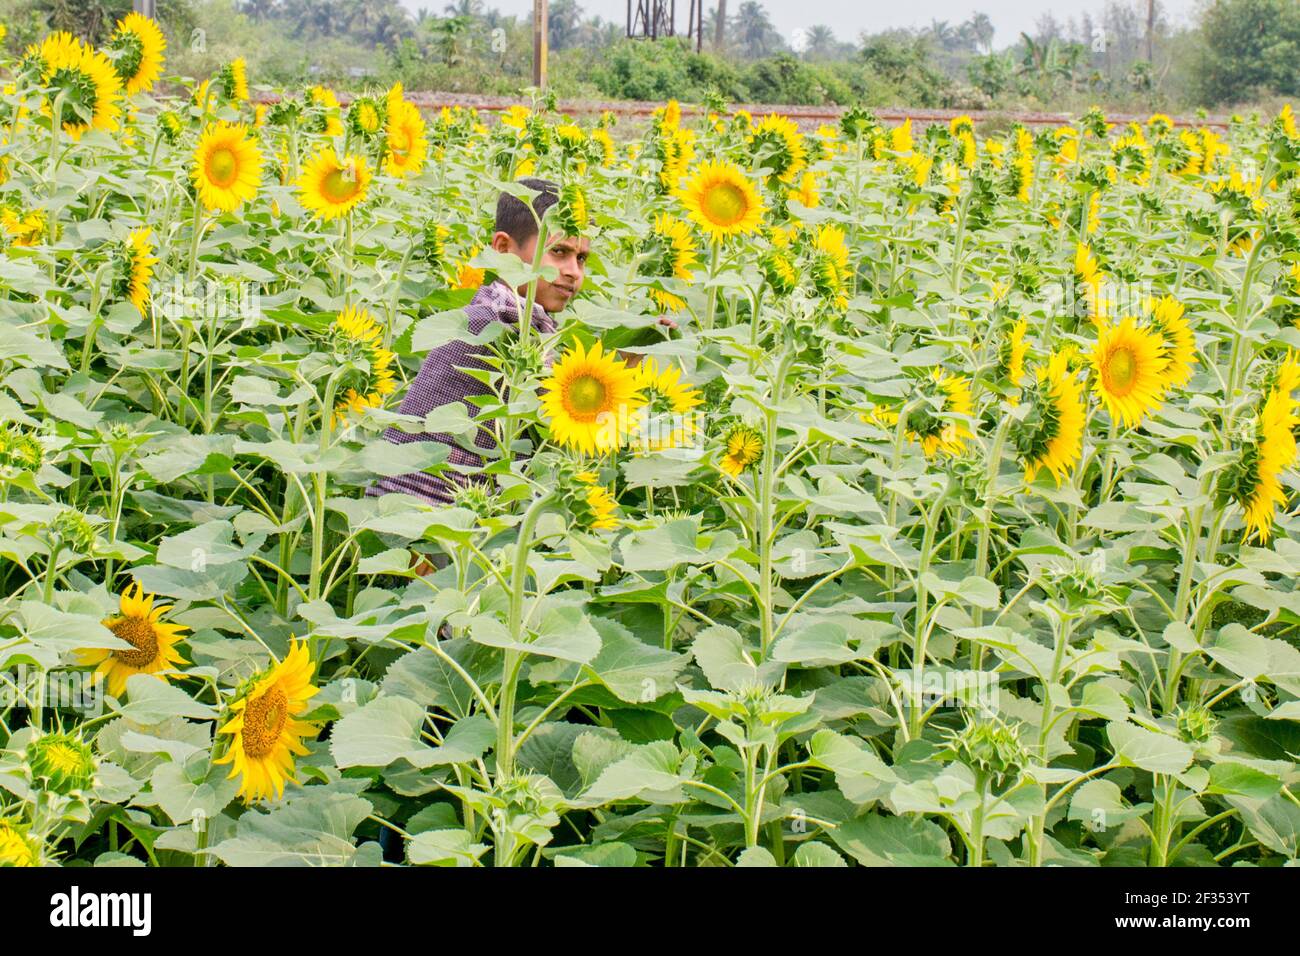 hooghly west bengal india on march 11th 2021:This is a picture of a sunflower field in rural Hooghly.Boys playing in the sunflower field. Stock Photo